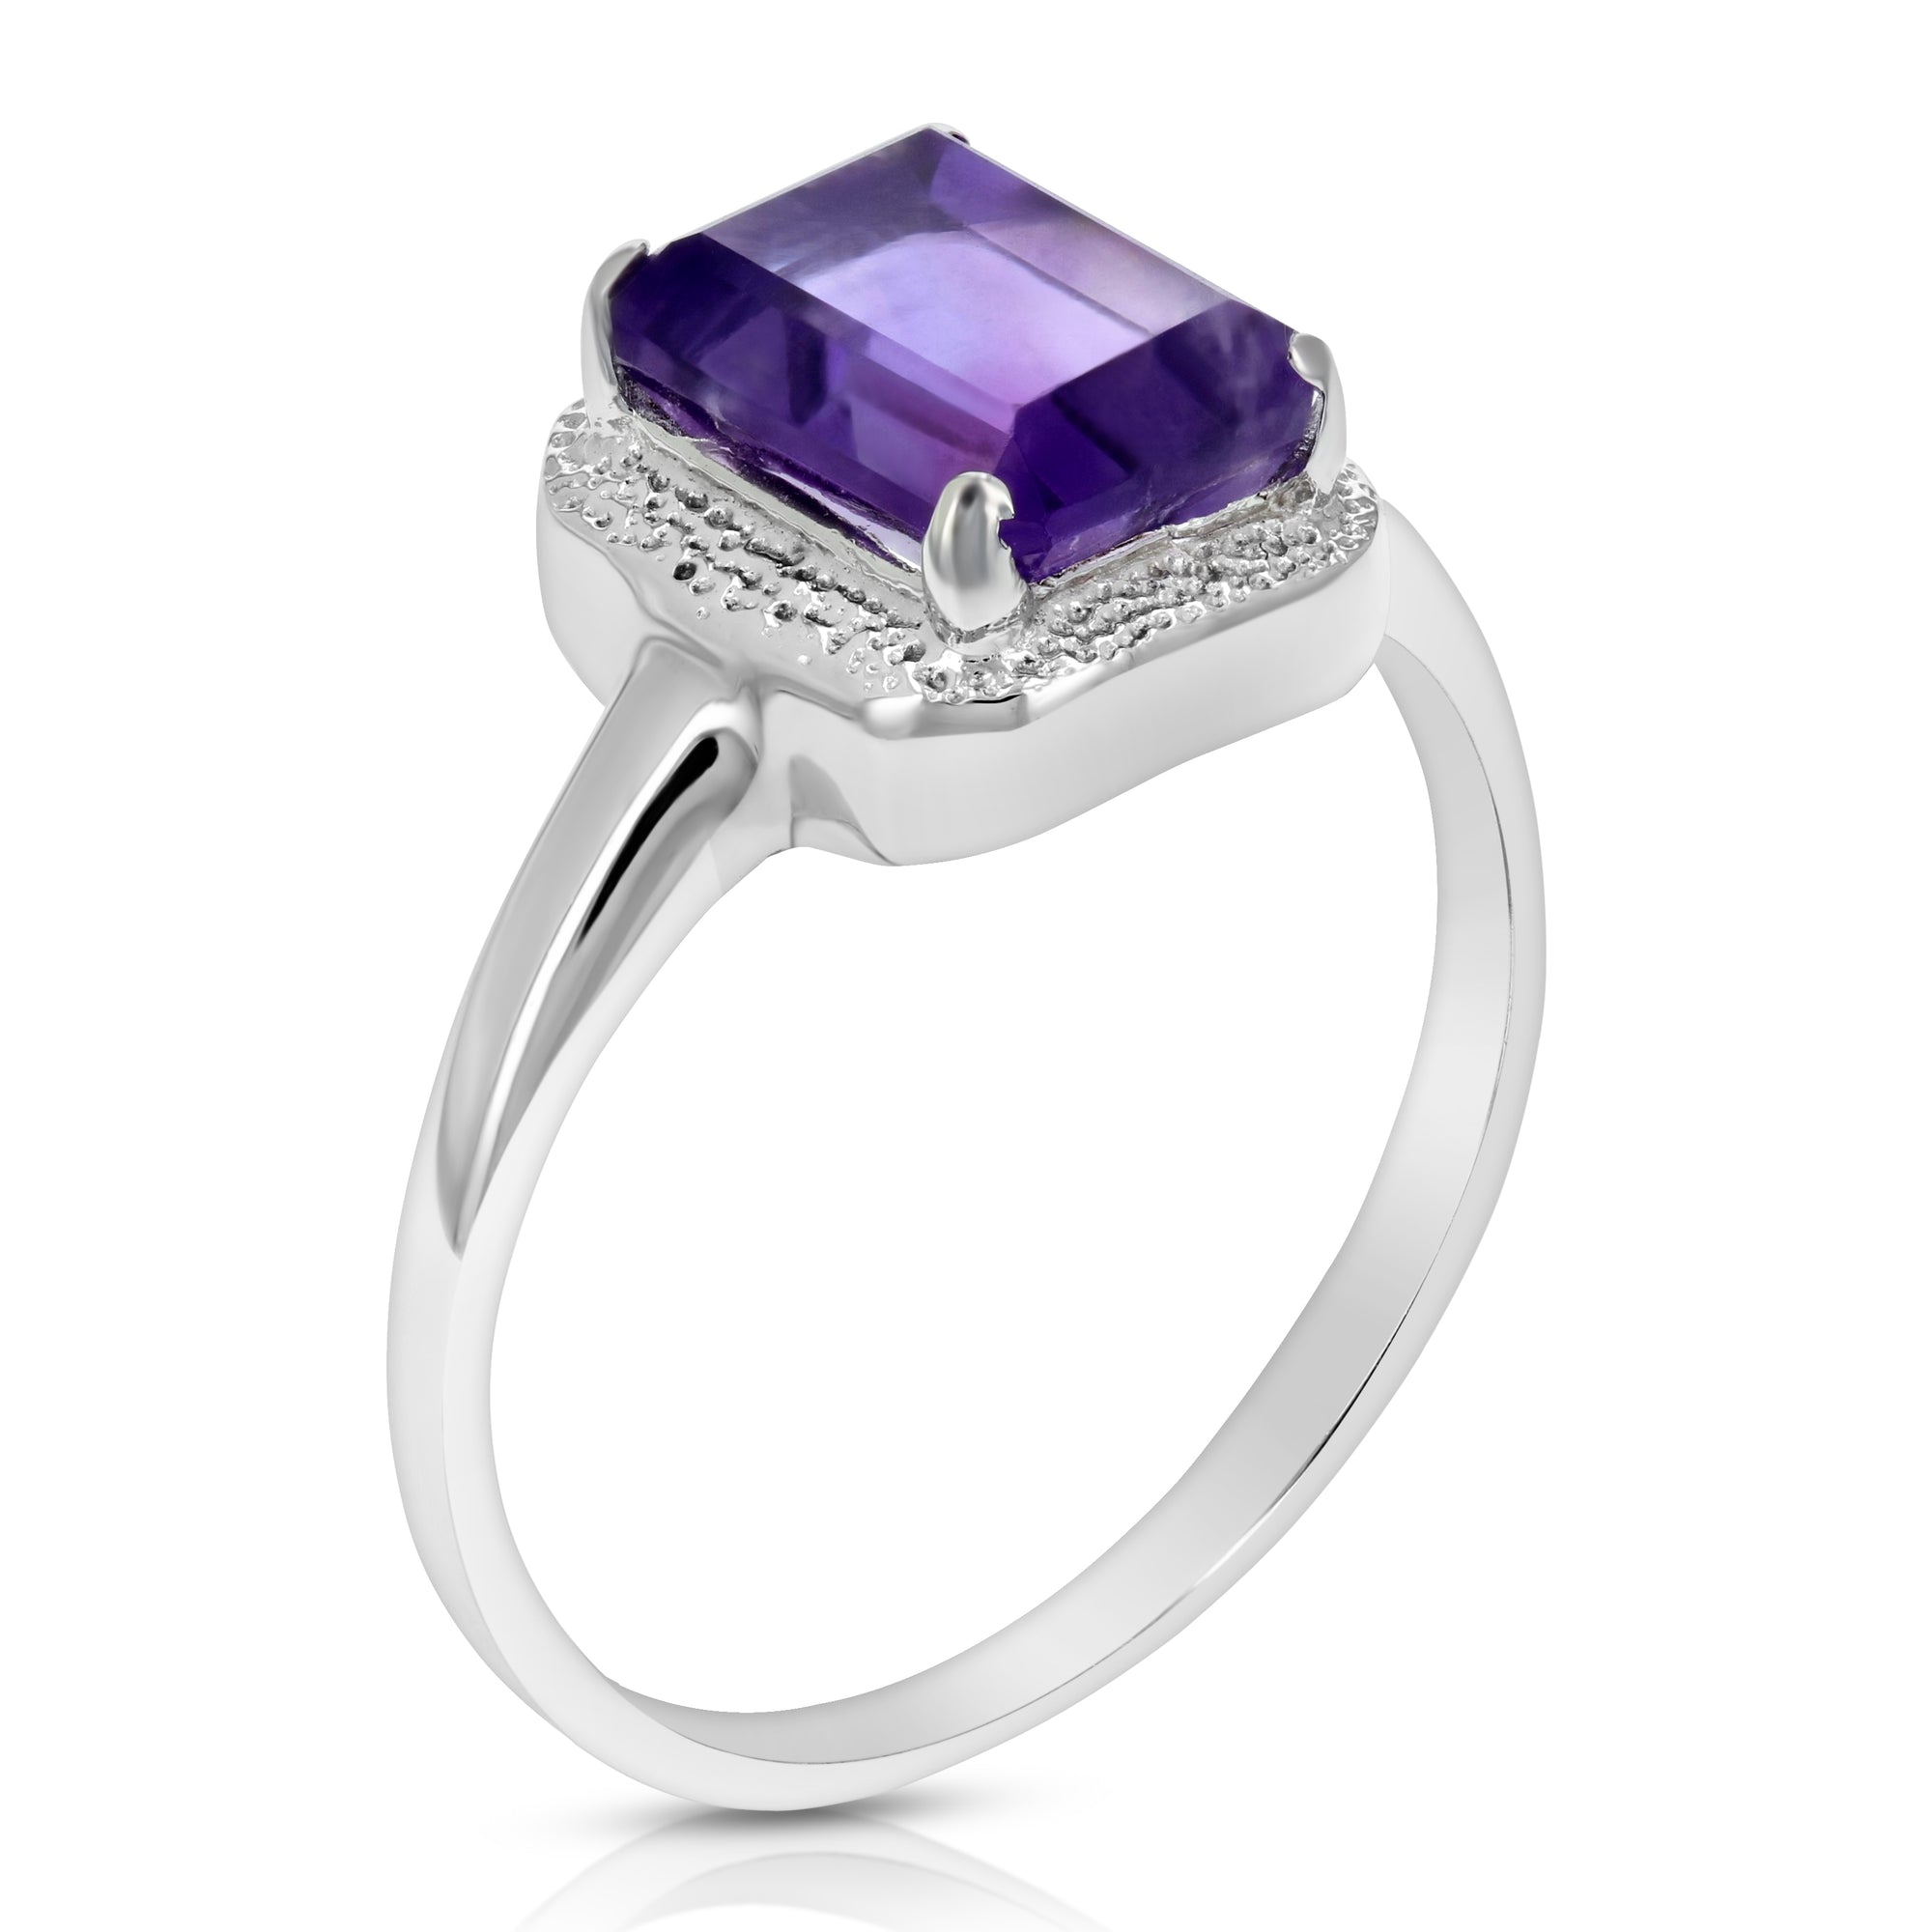 0.90 cttw Purple Amethyst Ring .925 Sterling Silver with Rhodium Emerald 8x6 MM